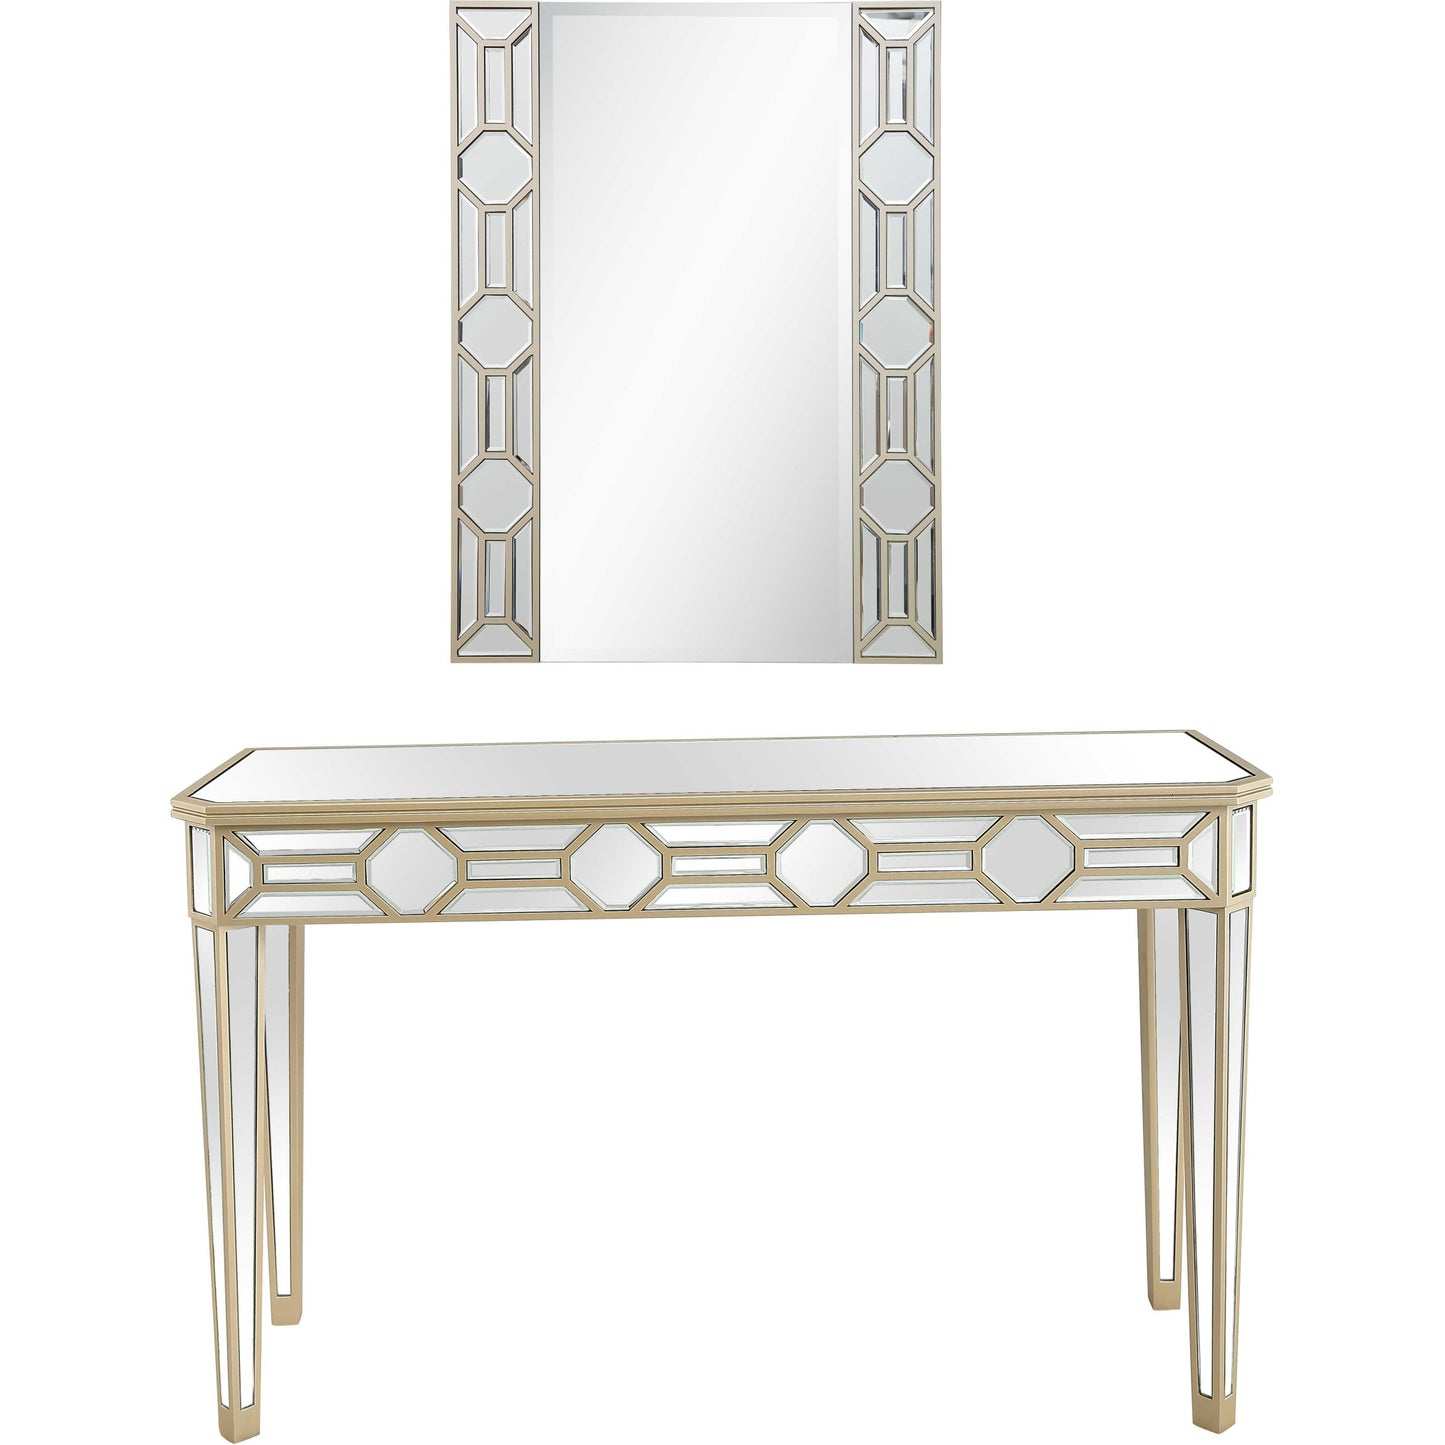 Set of Two 47" Silver and Champagne Mirrored Glass Console Table and Mirror By Homeroots